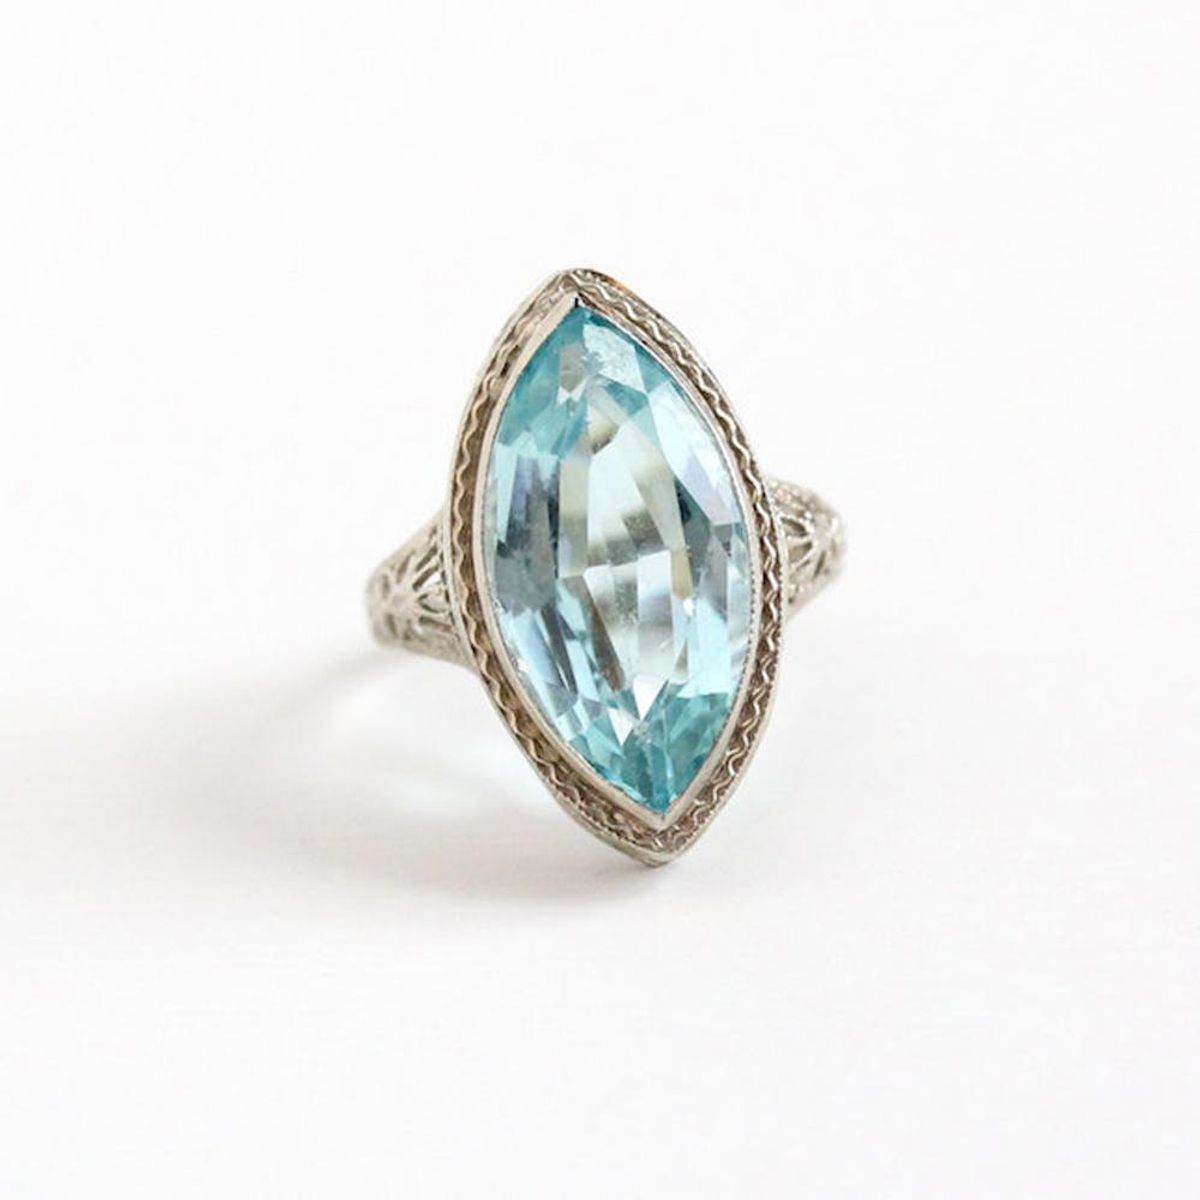 13 Aquamarine Engagement Rings That’ll Sweep You Off Your Feet